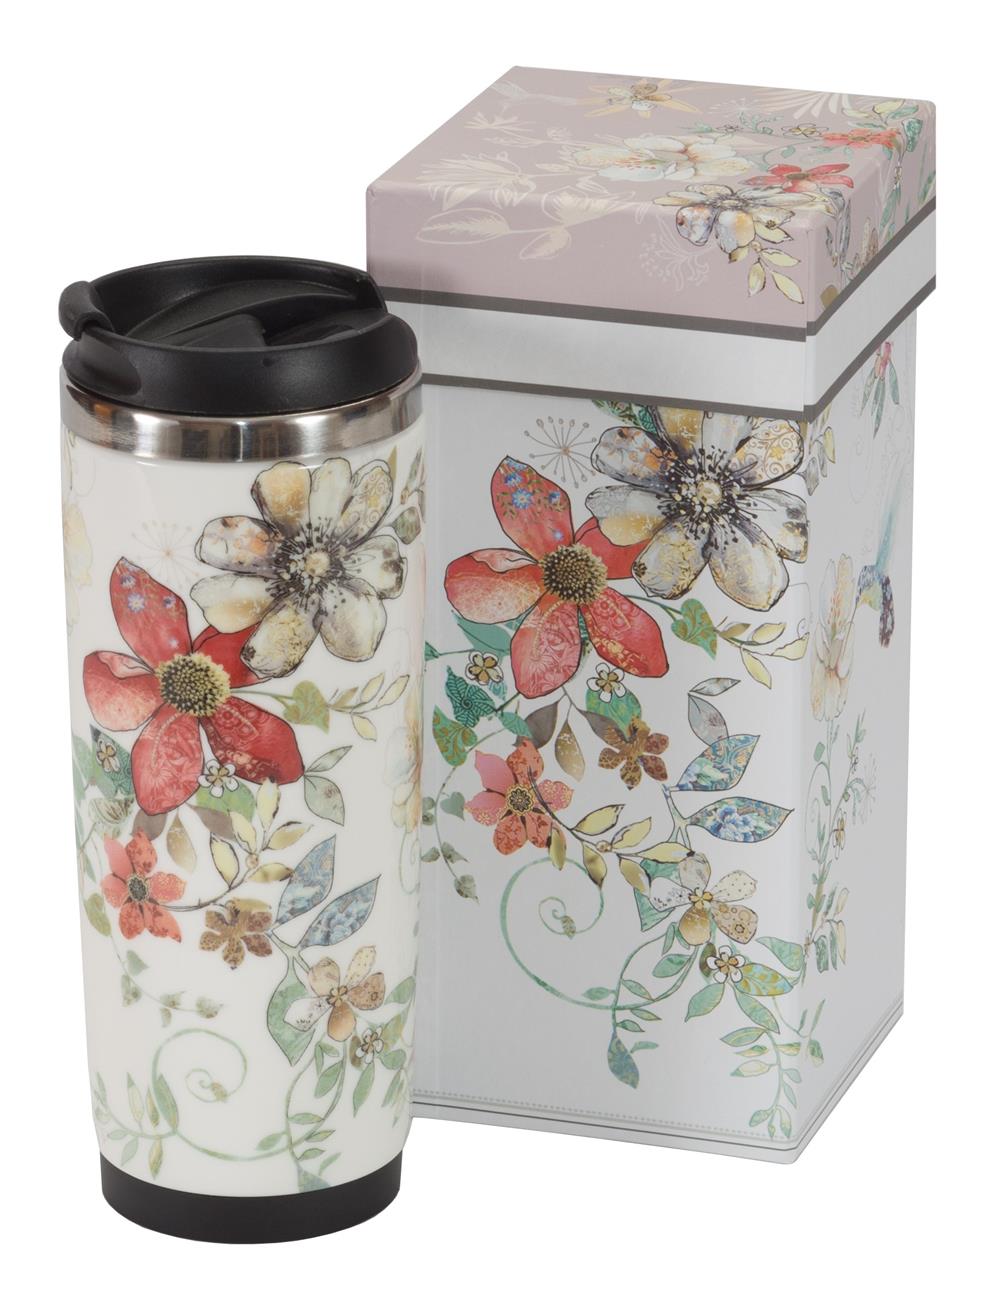 Special Offer - Hummingbird Travel Mug with free pack of matching coasters